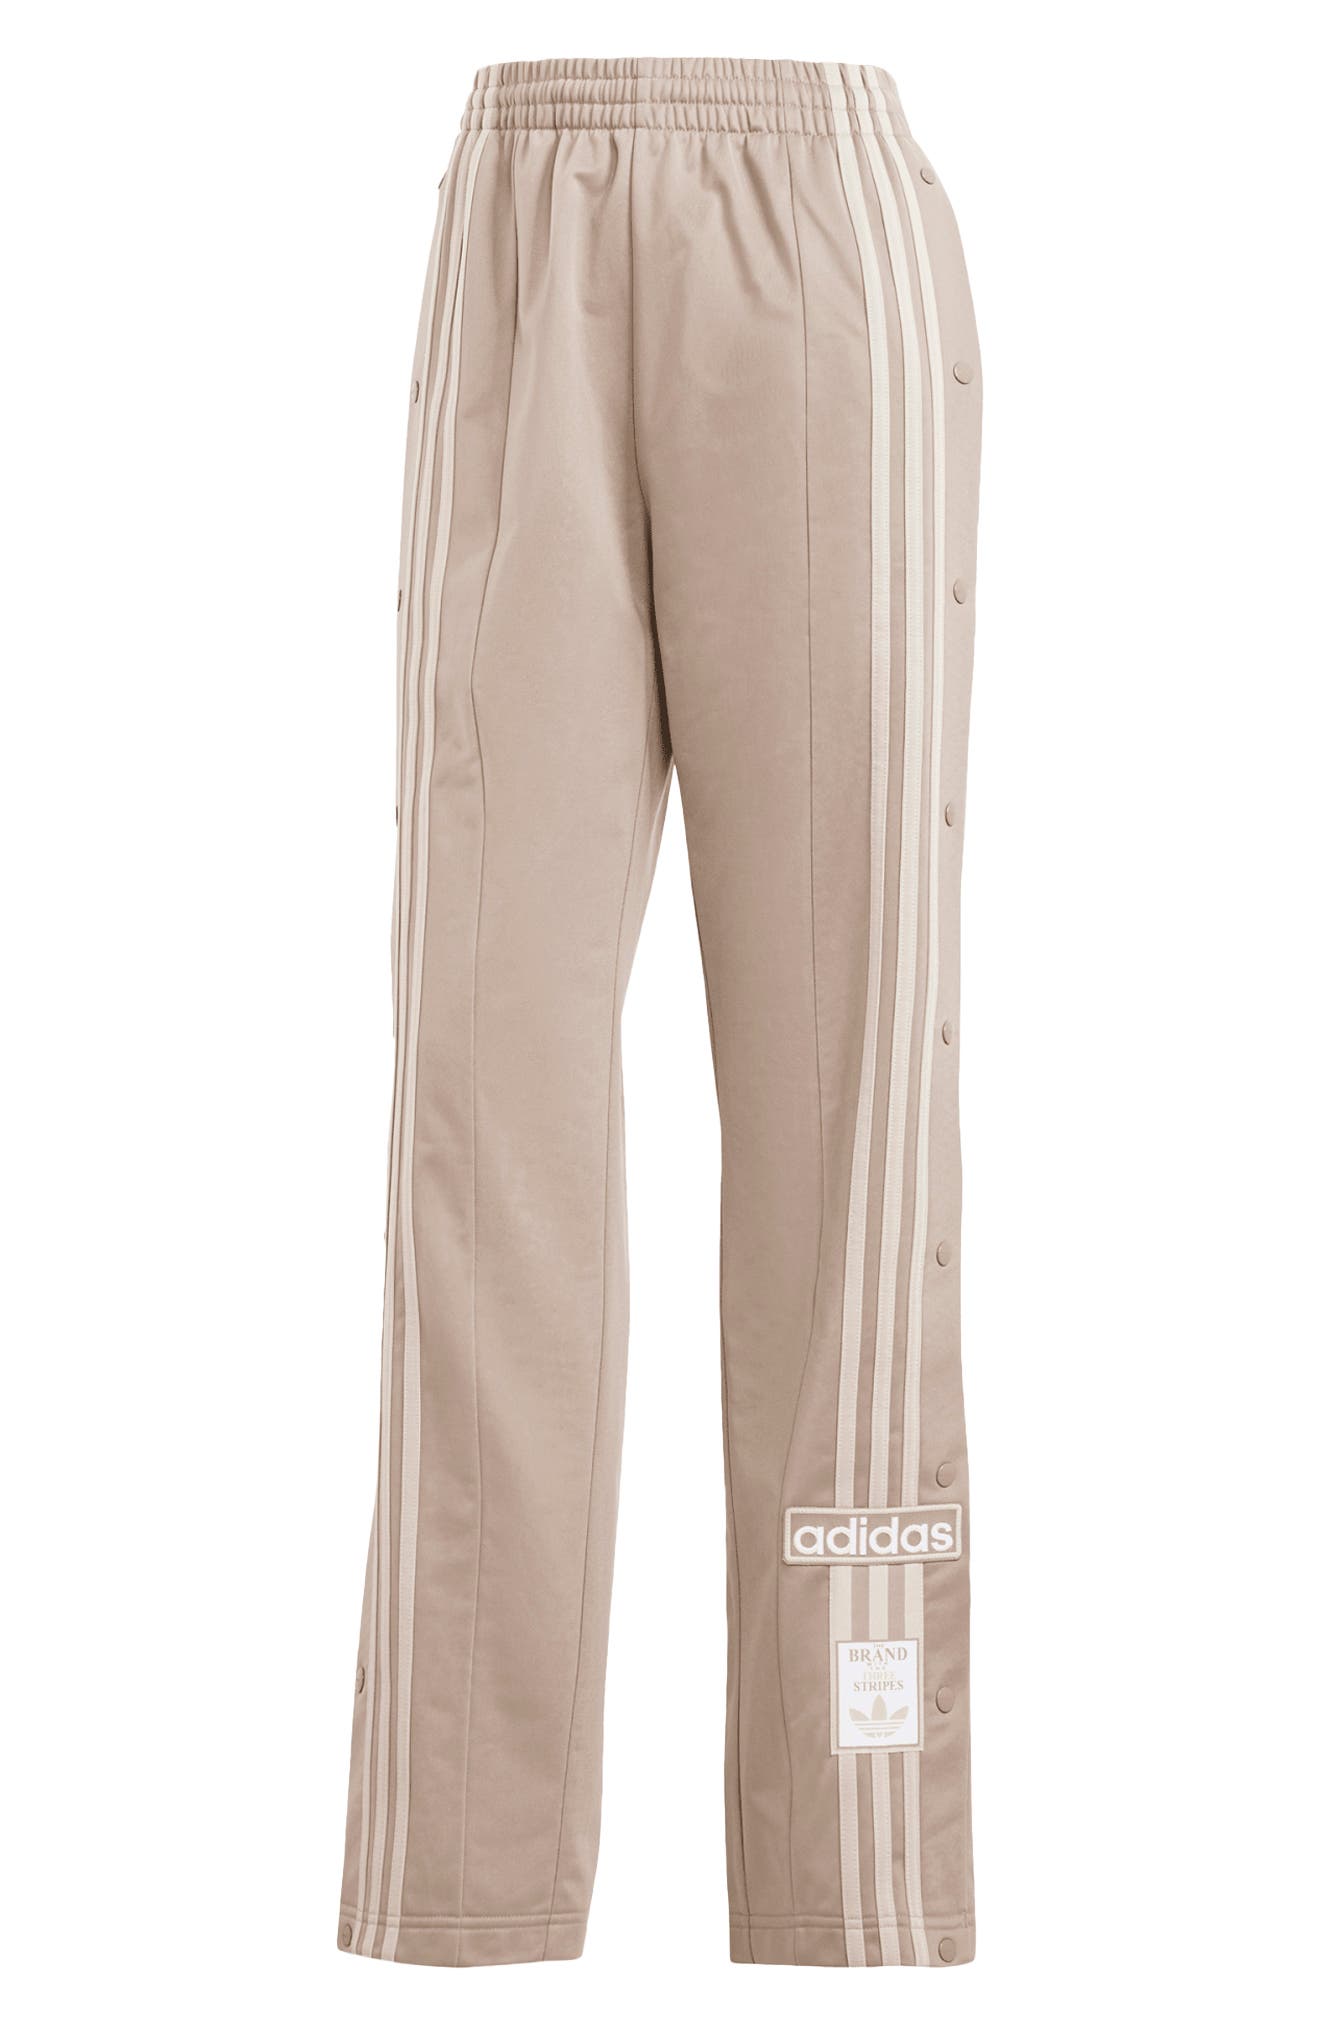 adidas Originals Essentials ribbed flared pants in brown